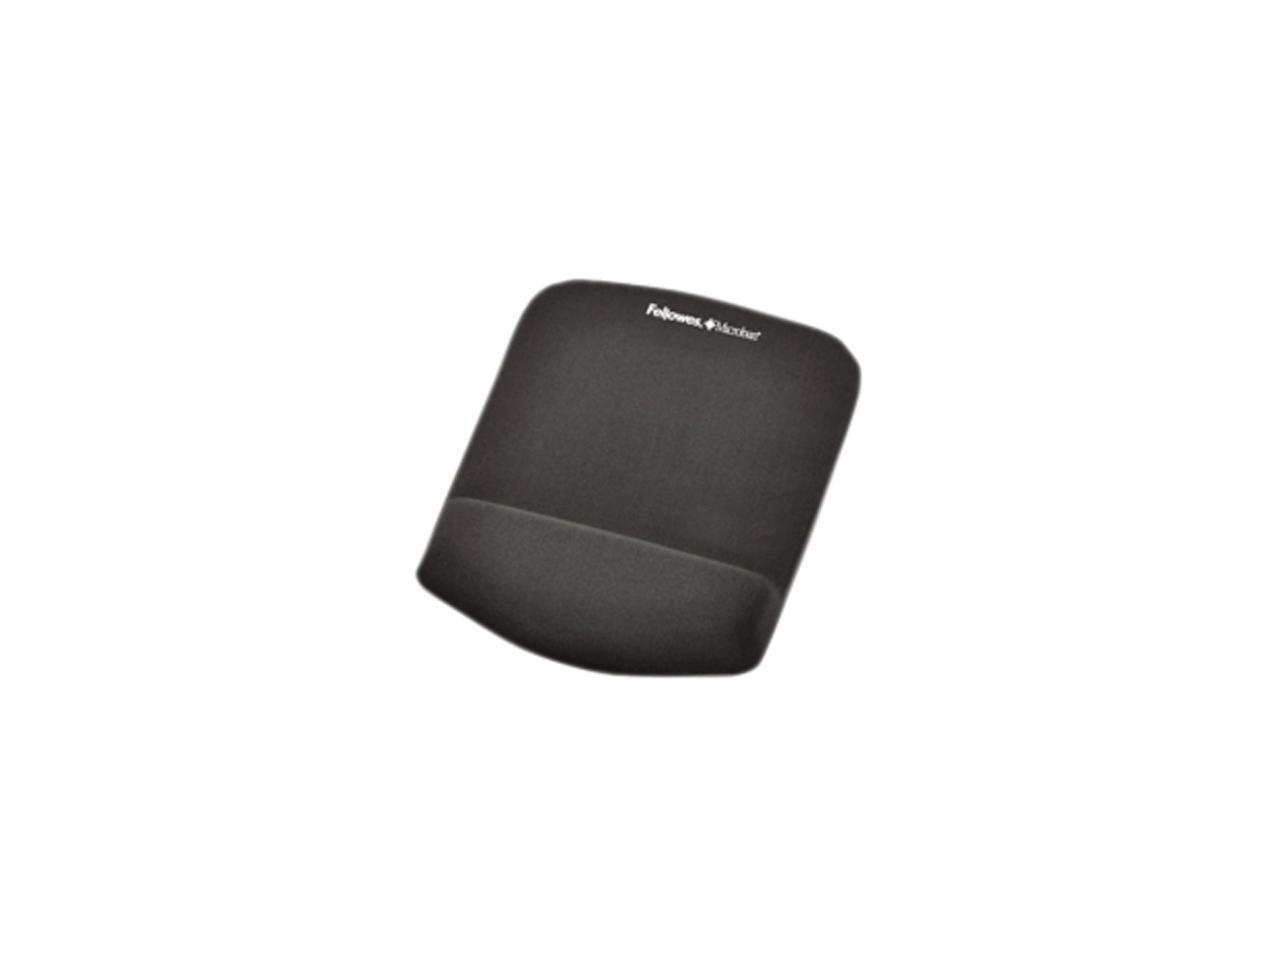 Fellowes PlushTouch Mouse Pad/Wrist Rest with FoamFusion Technology - Graphite - image 1 of 3